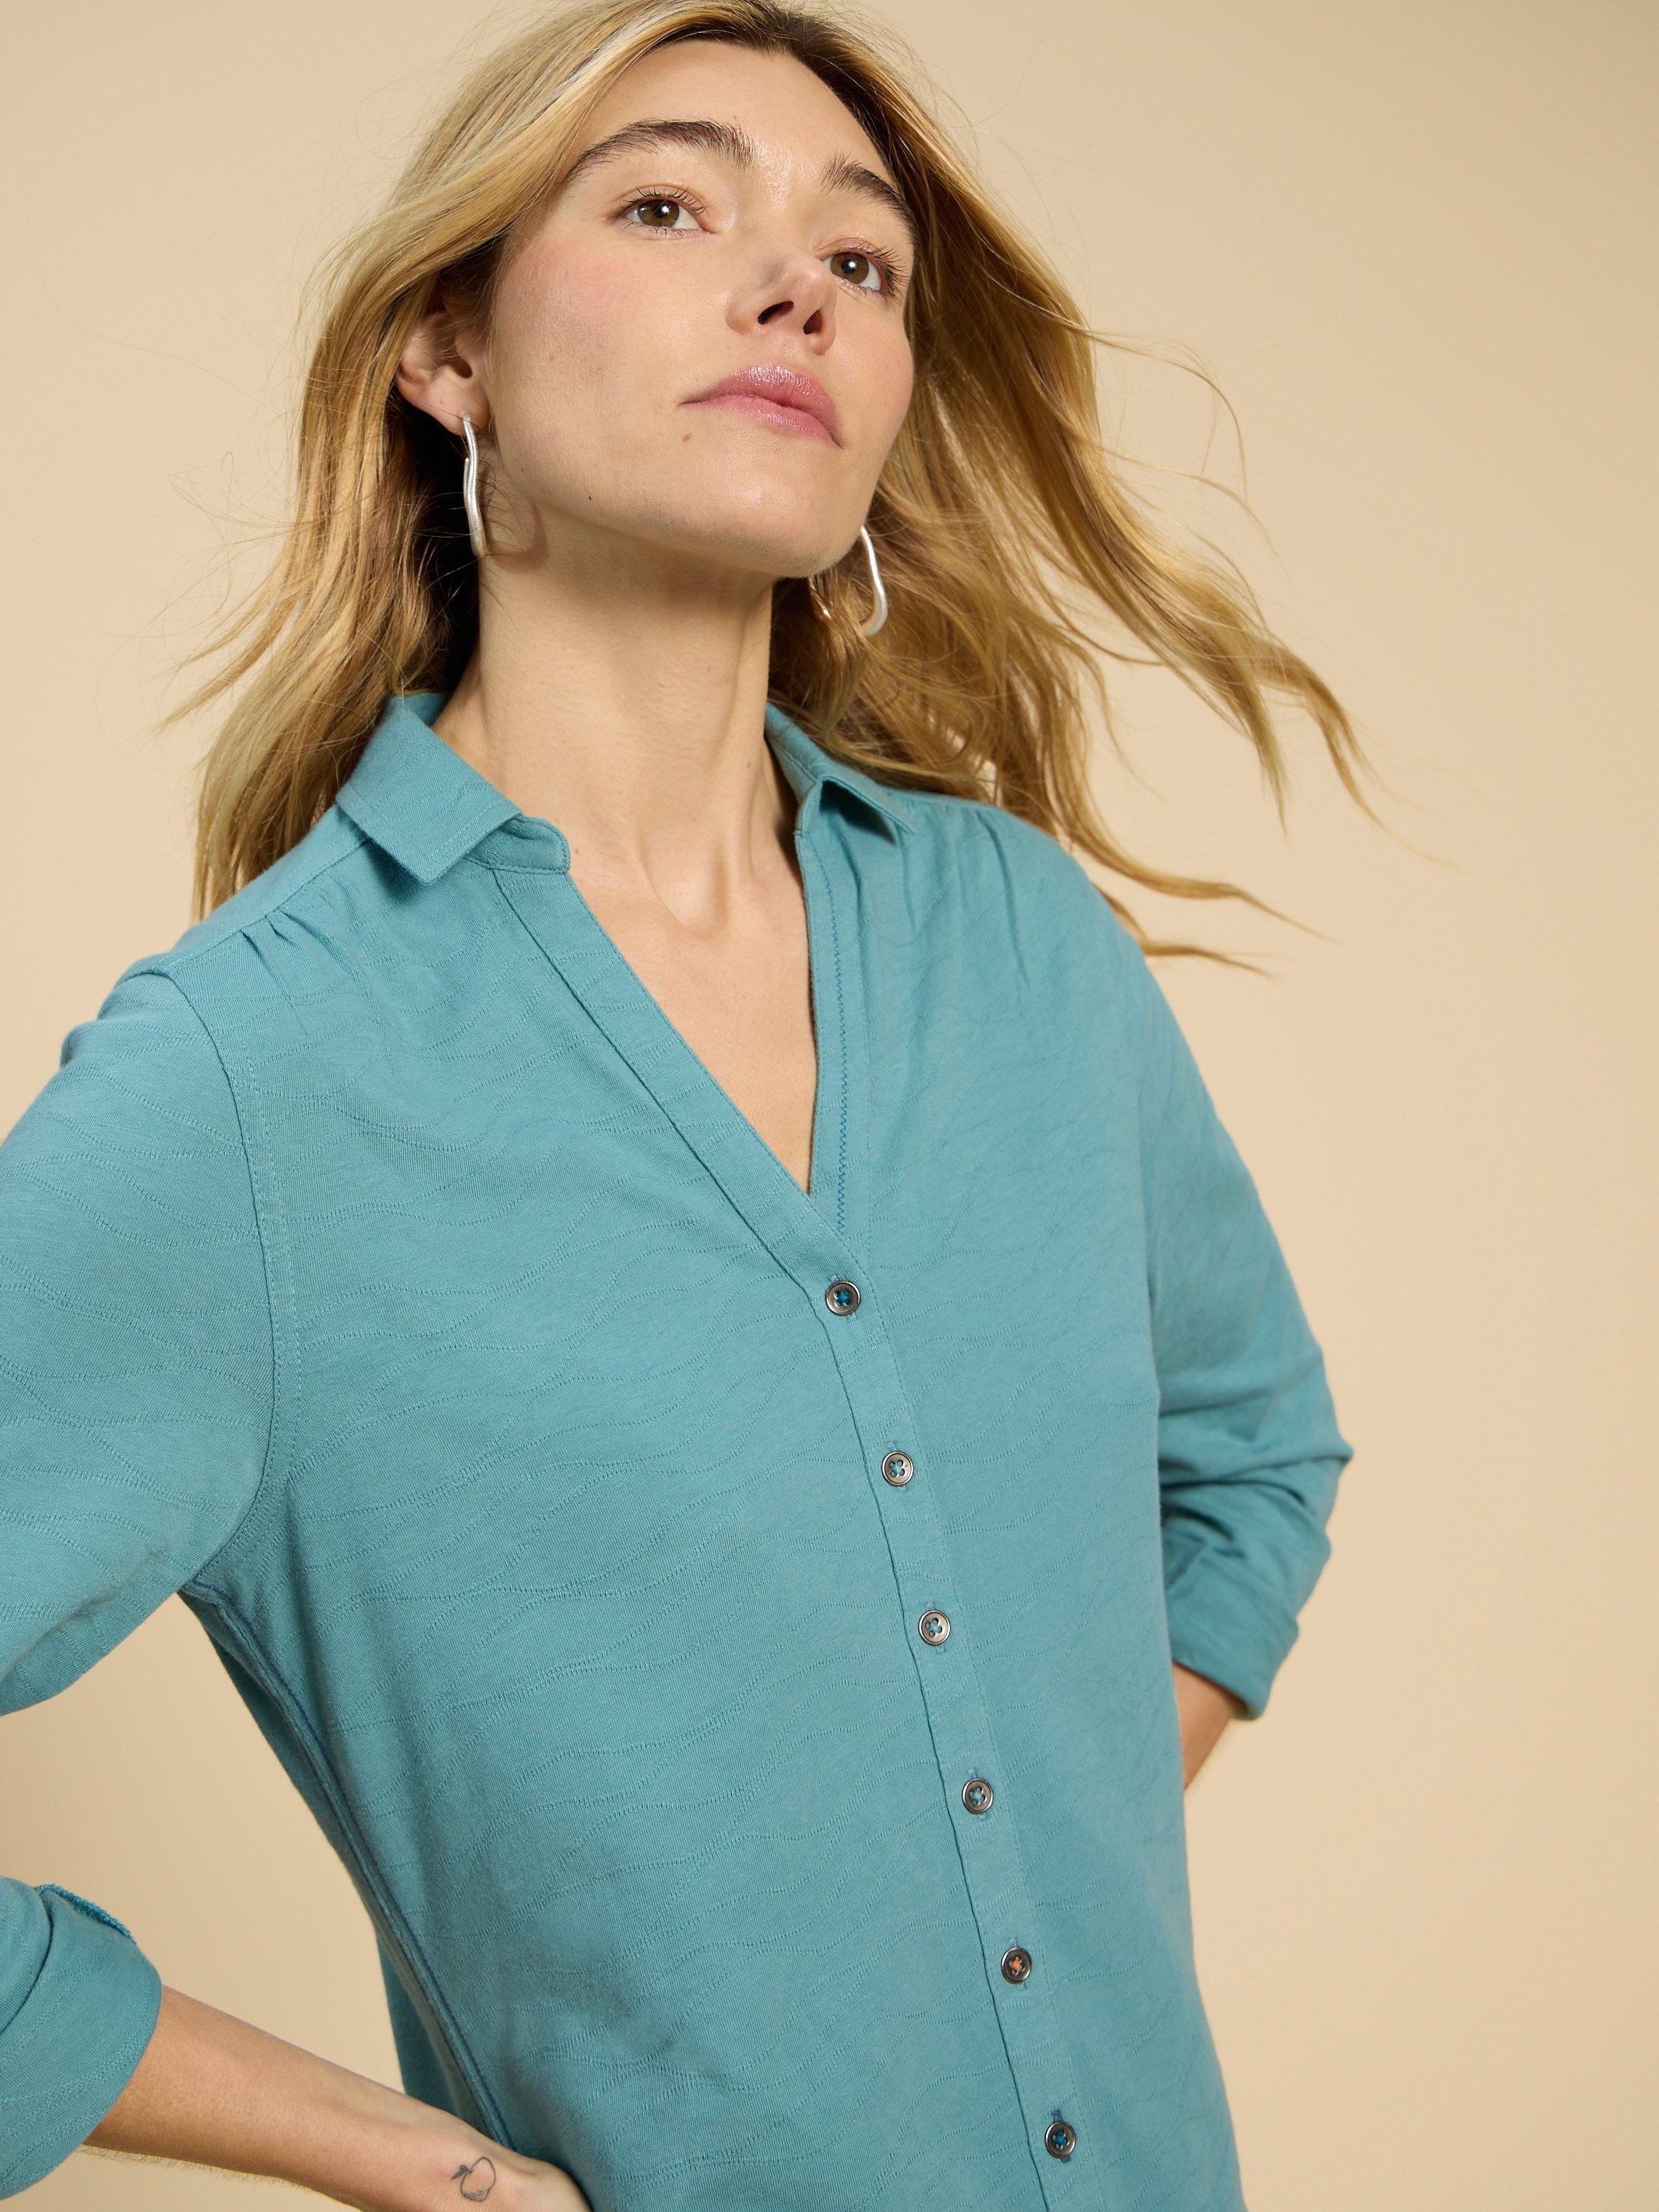 TEXTURED ANNIE in MID TEAL - MODEL DETAIL